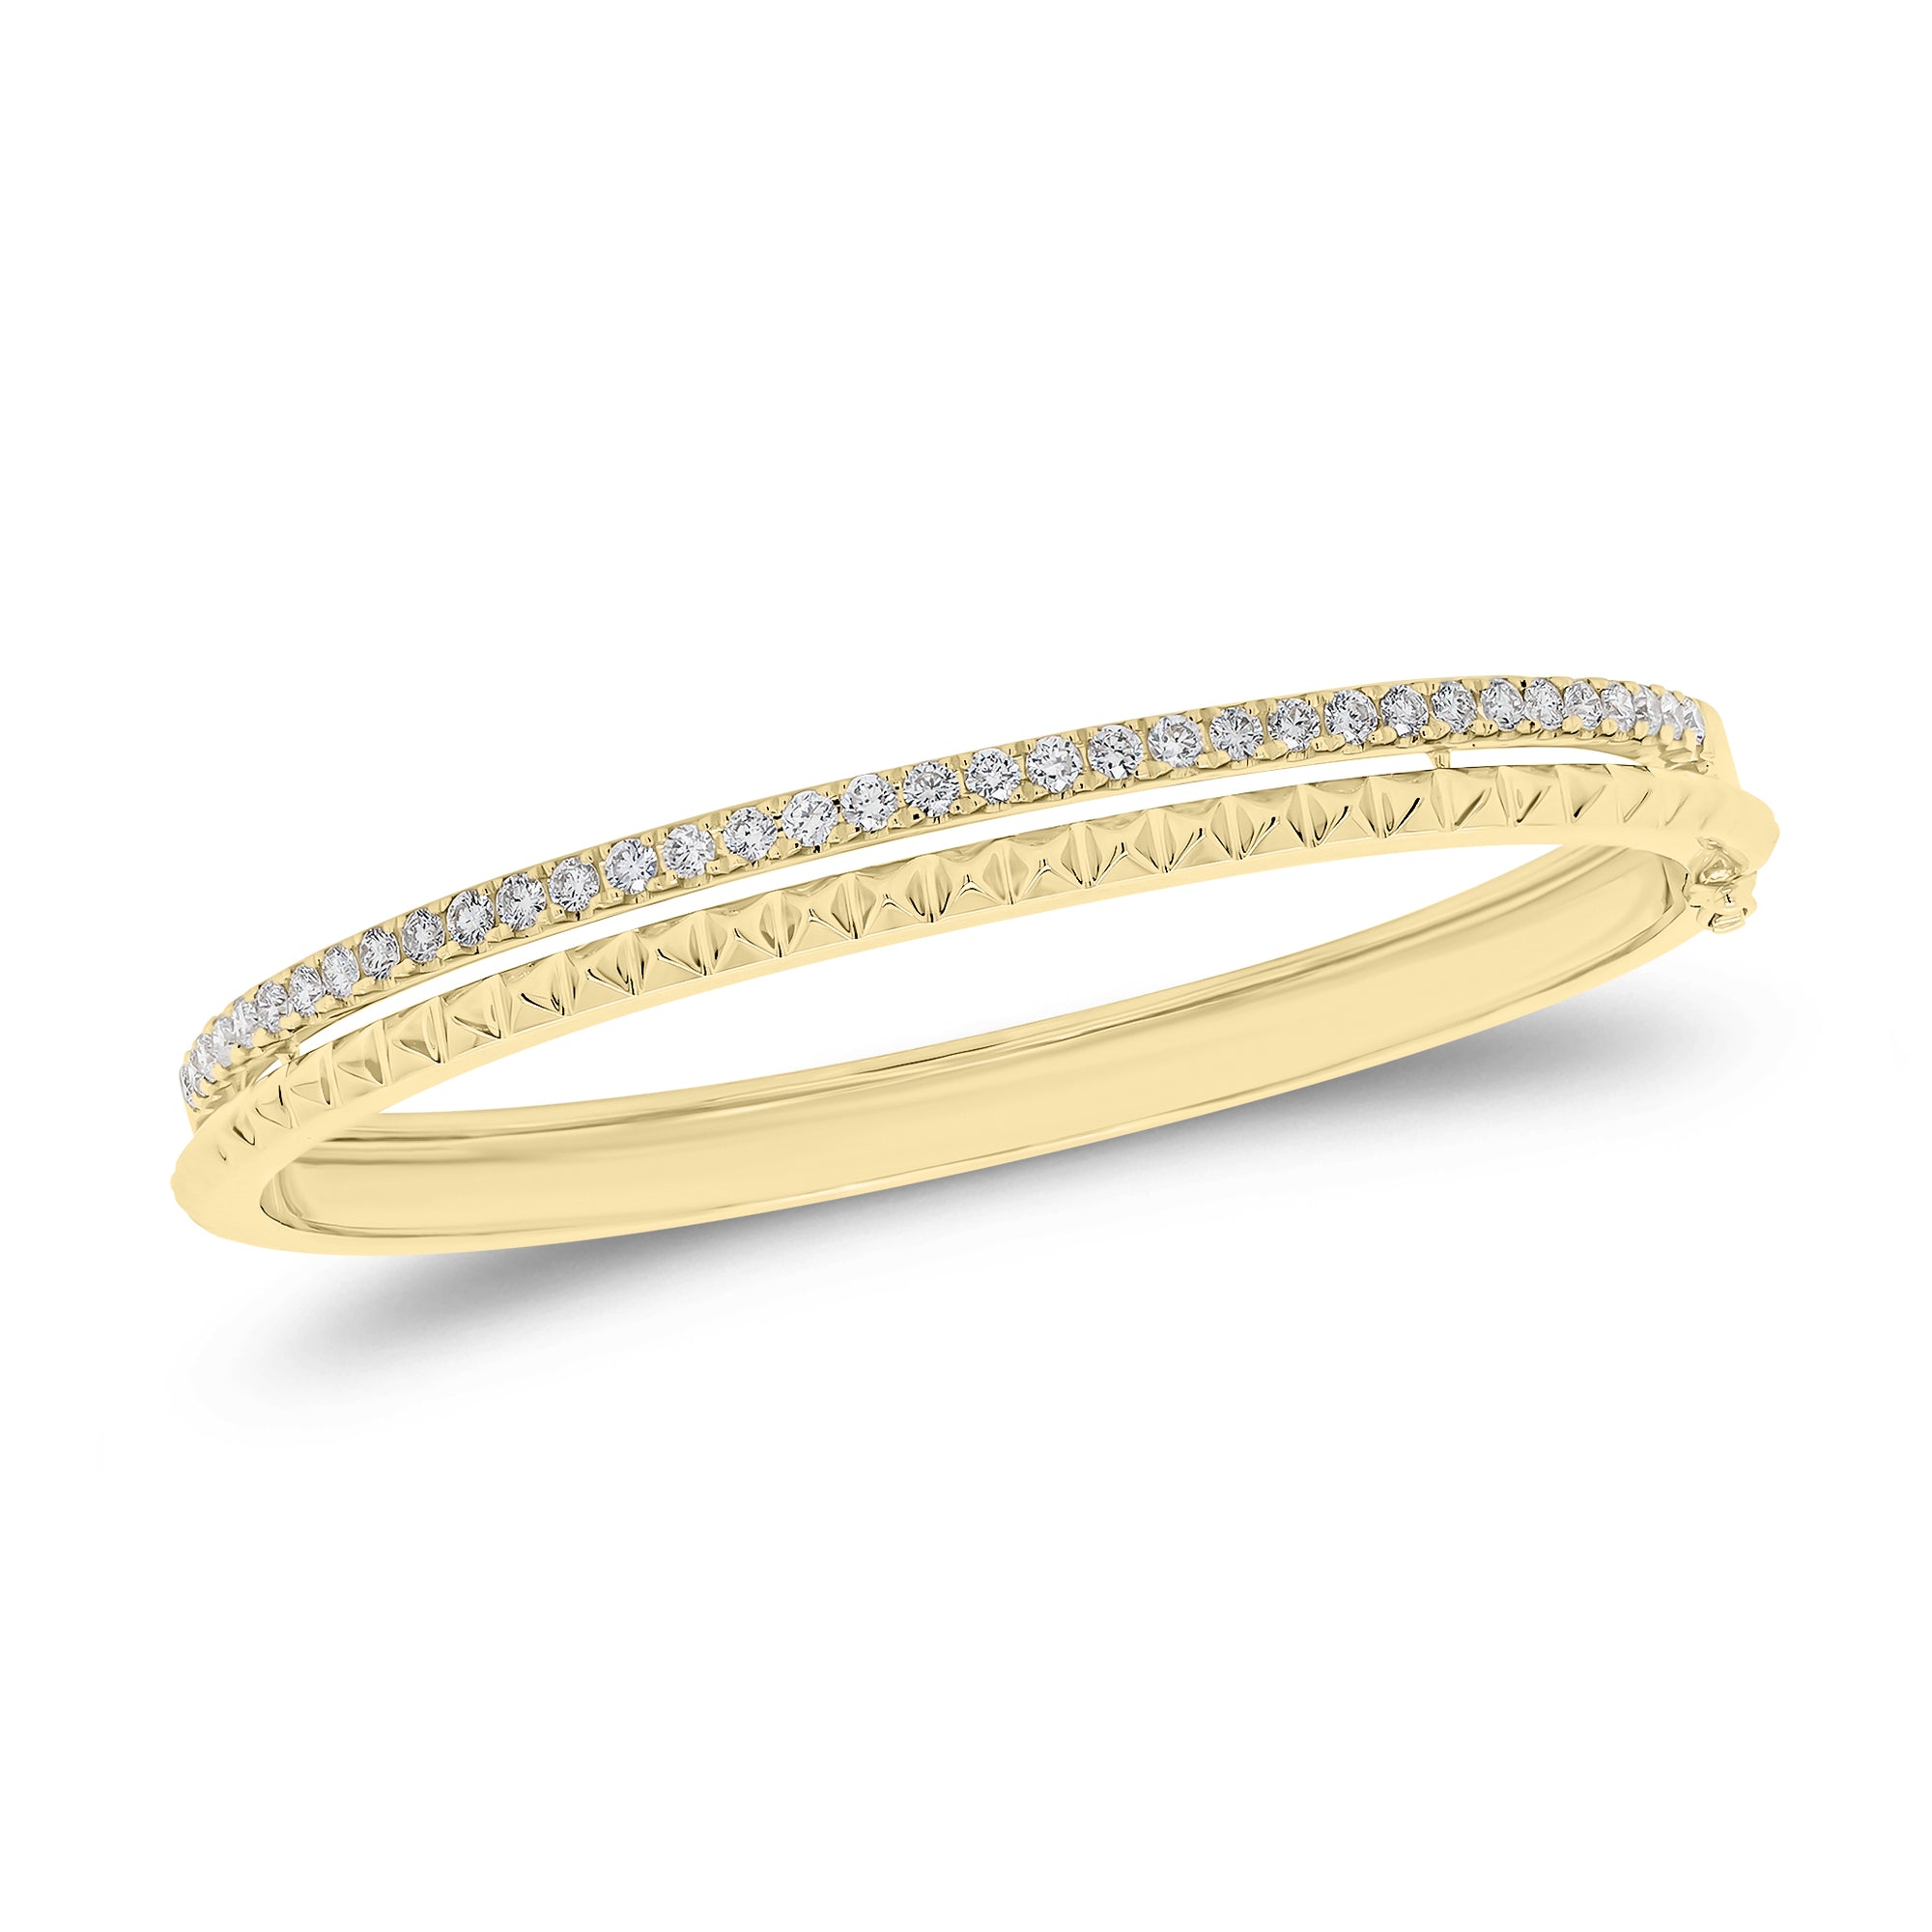 Solid 14K yellow gold weighing 16.06 grams featuring 35 round diamonds weighing 0.97 carats Diamond & Gold Pyramid Bangle | Nuha Jewelers